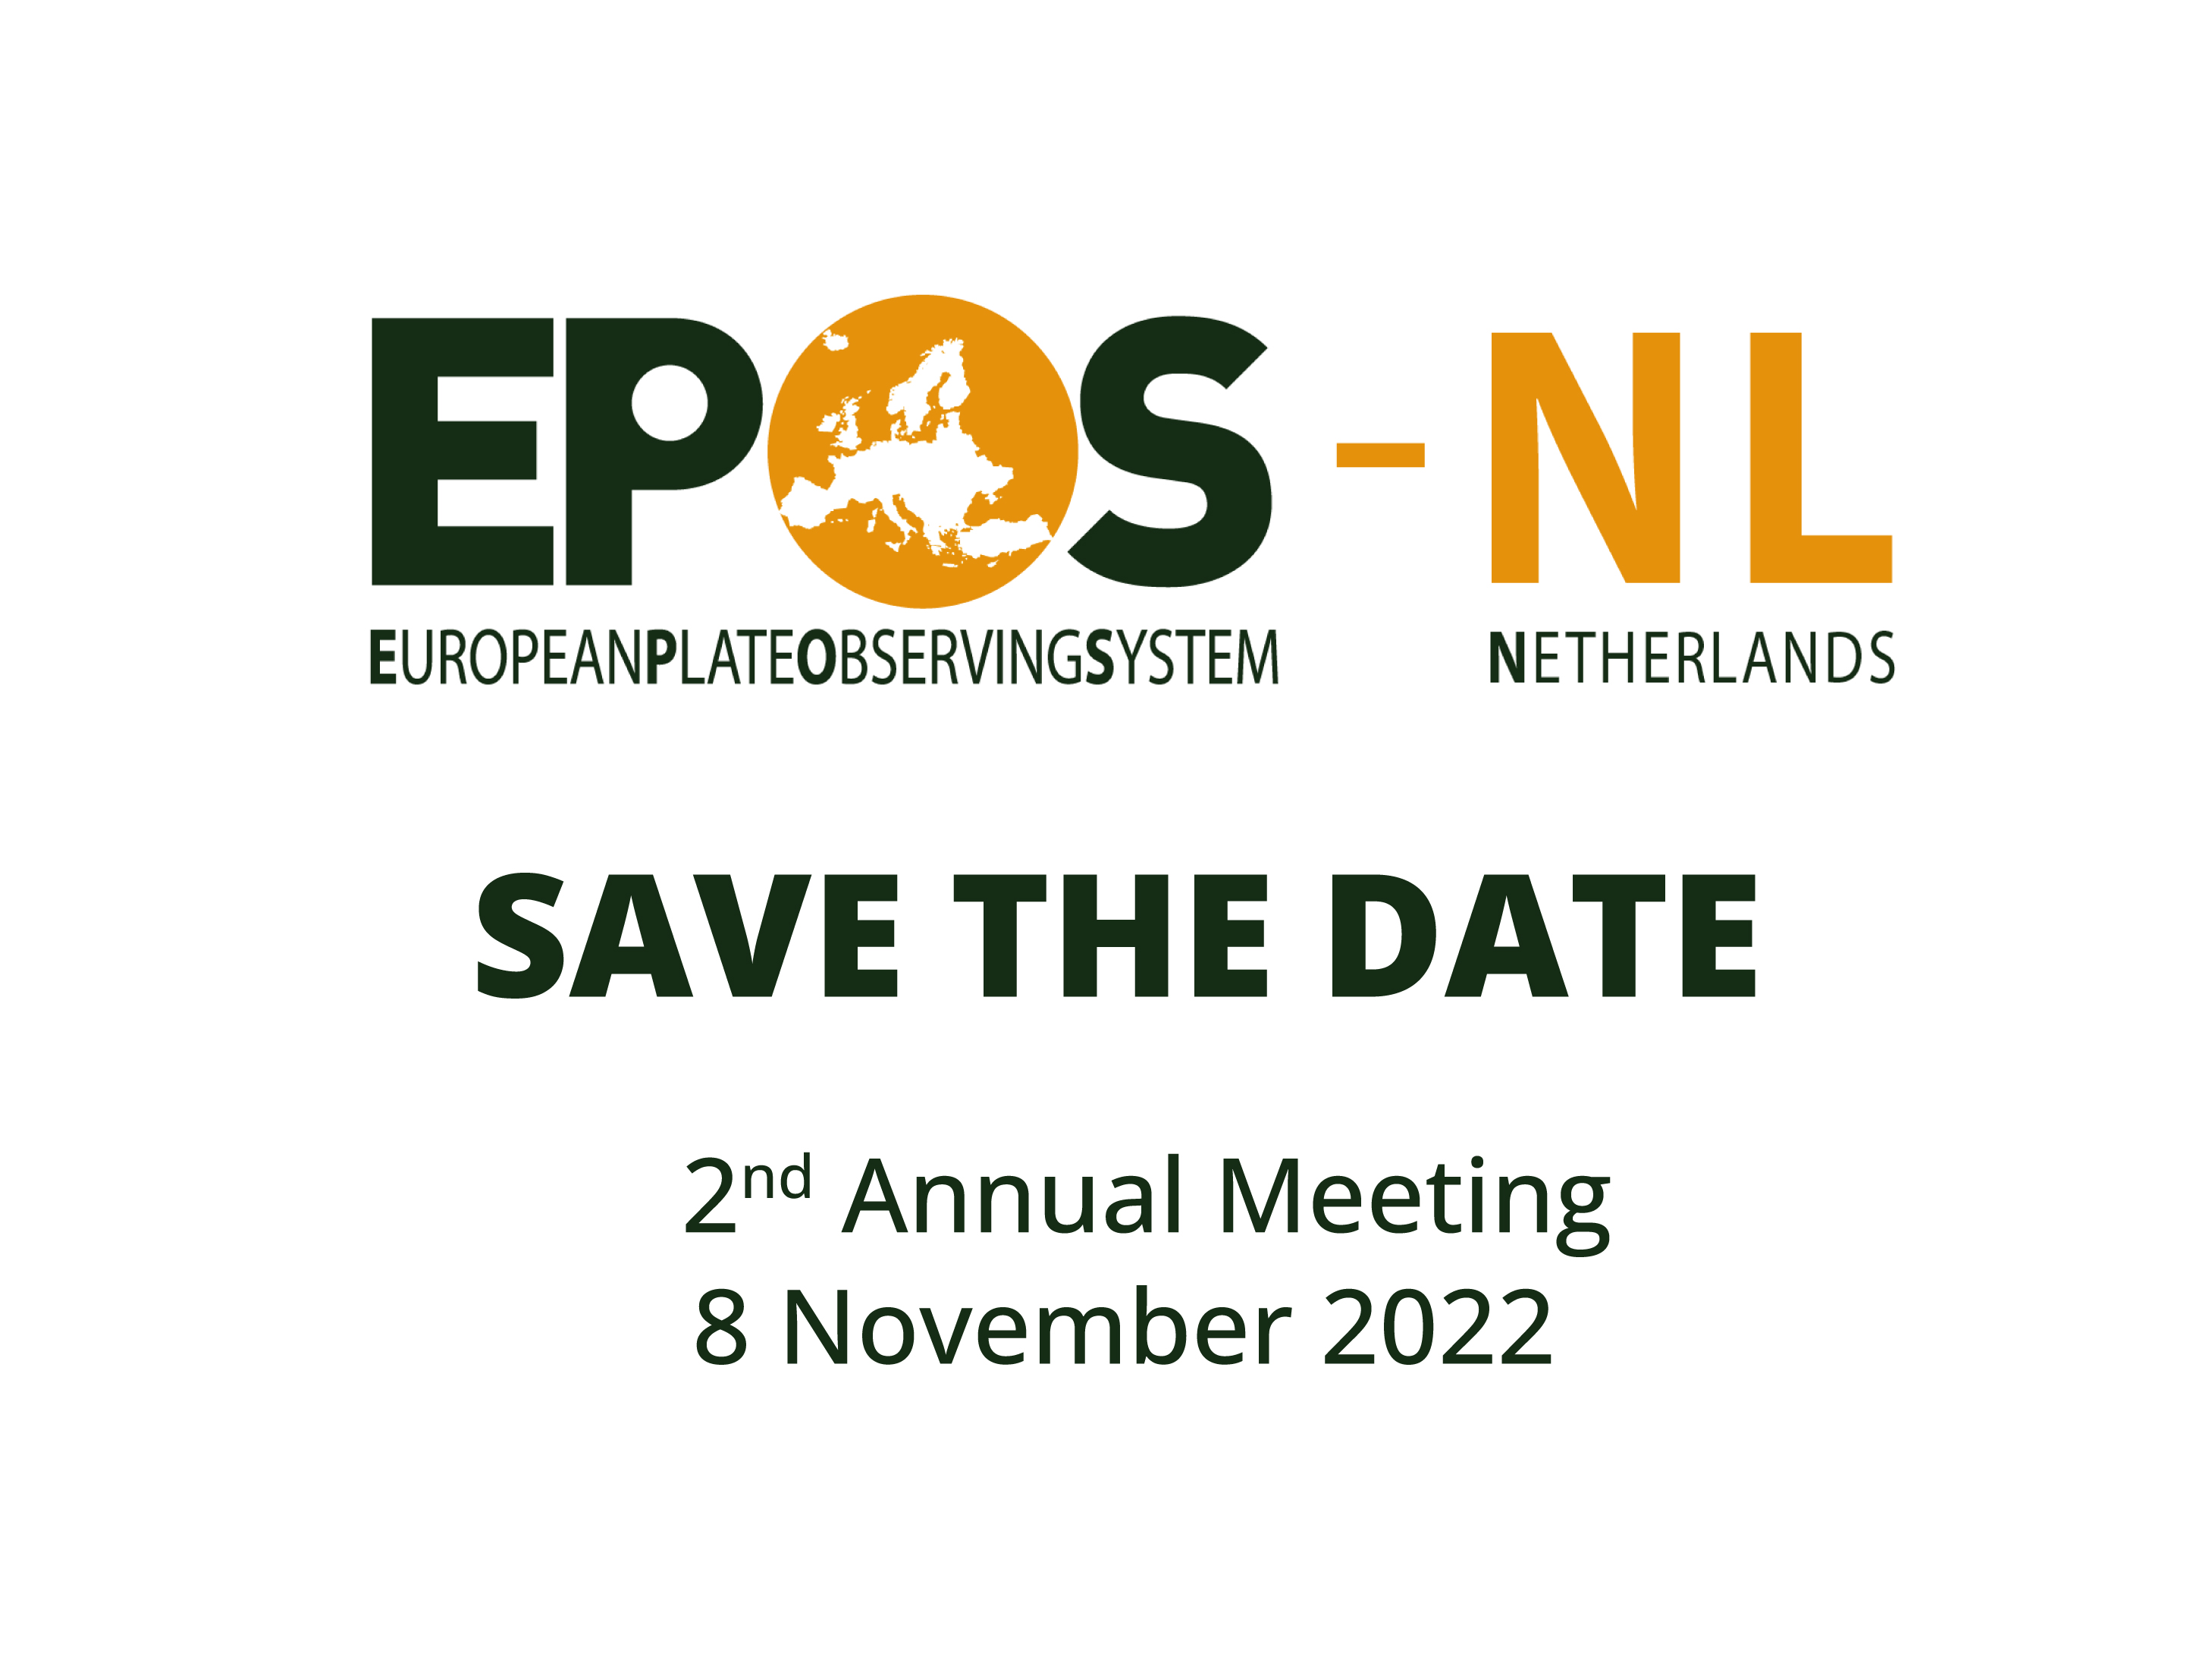 epos netherlands - save the date - 8 november 2022 second annual meeting